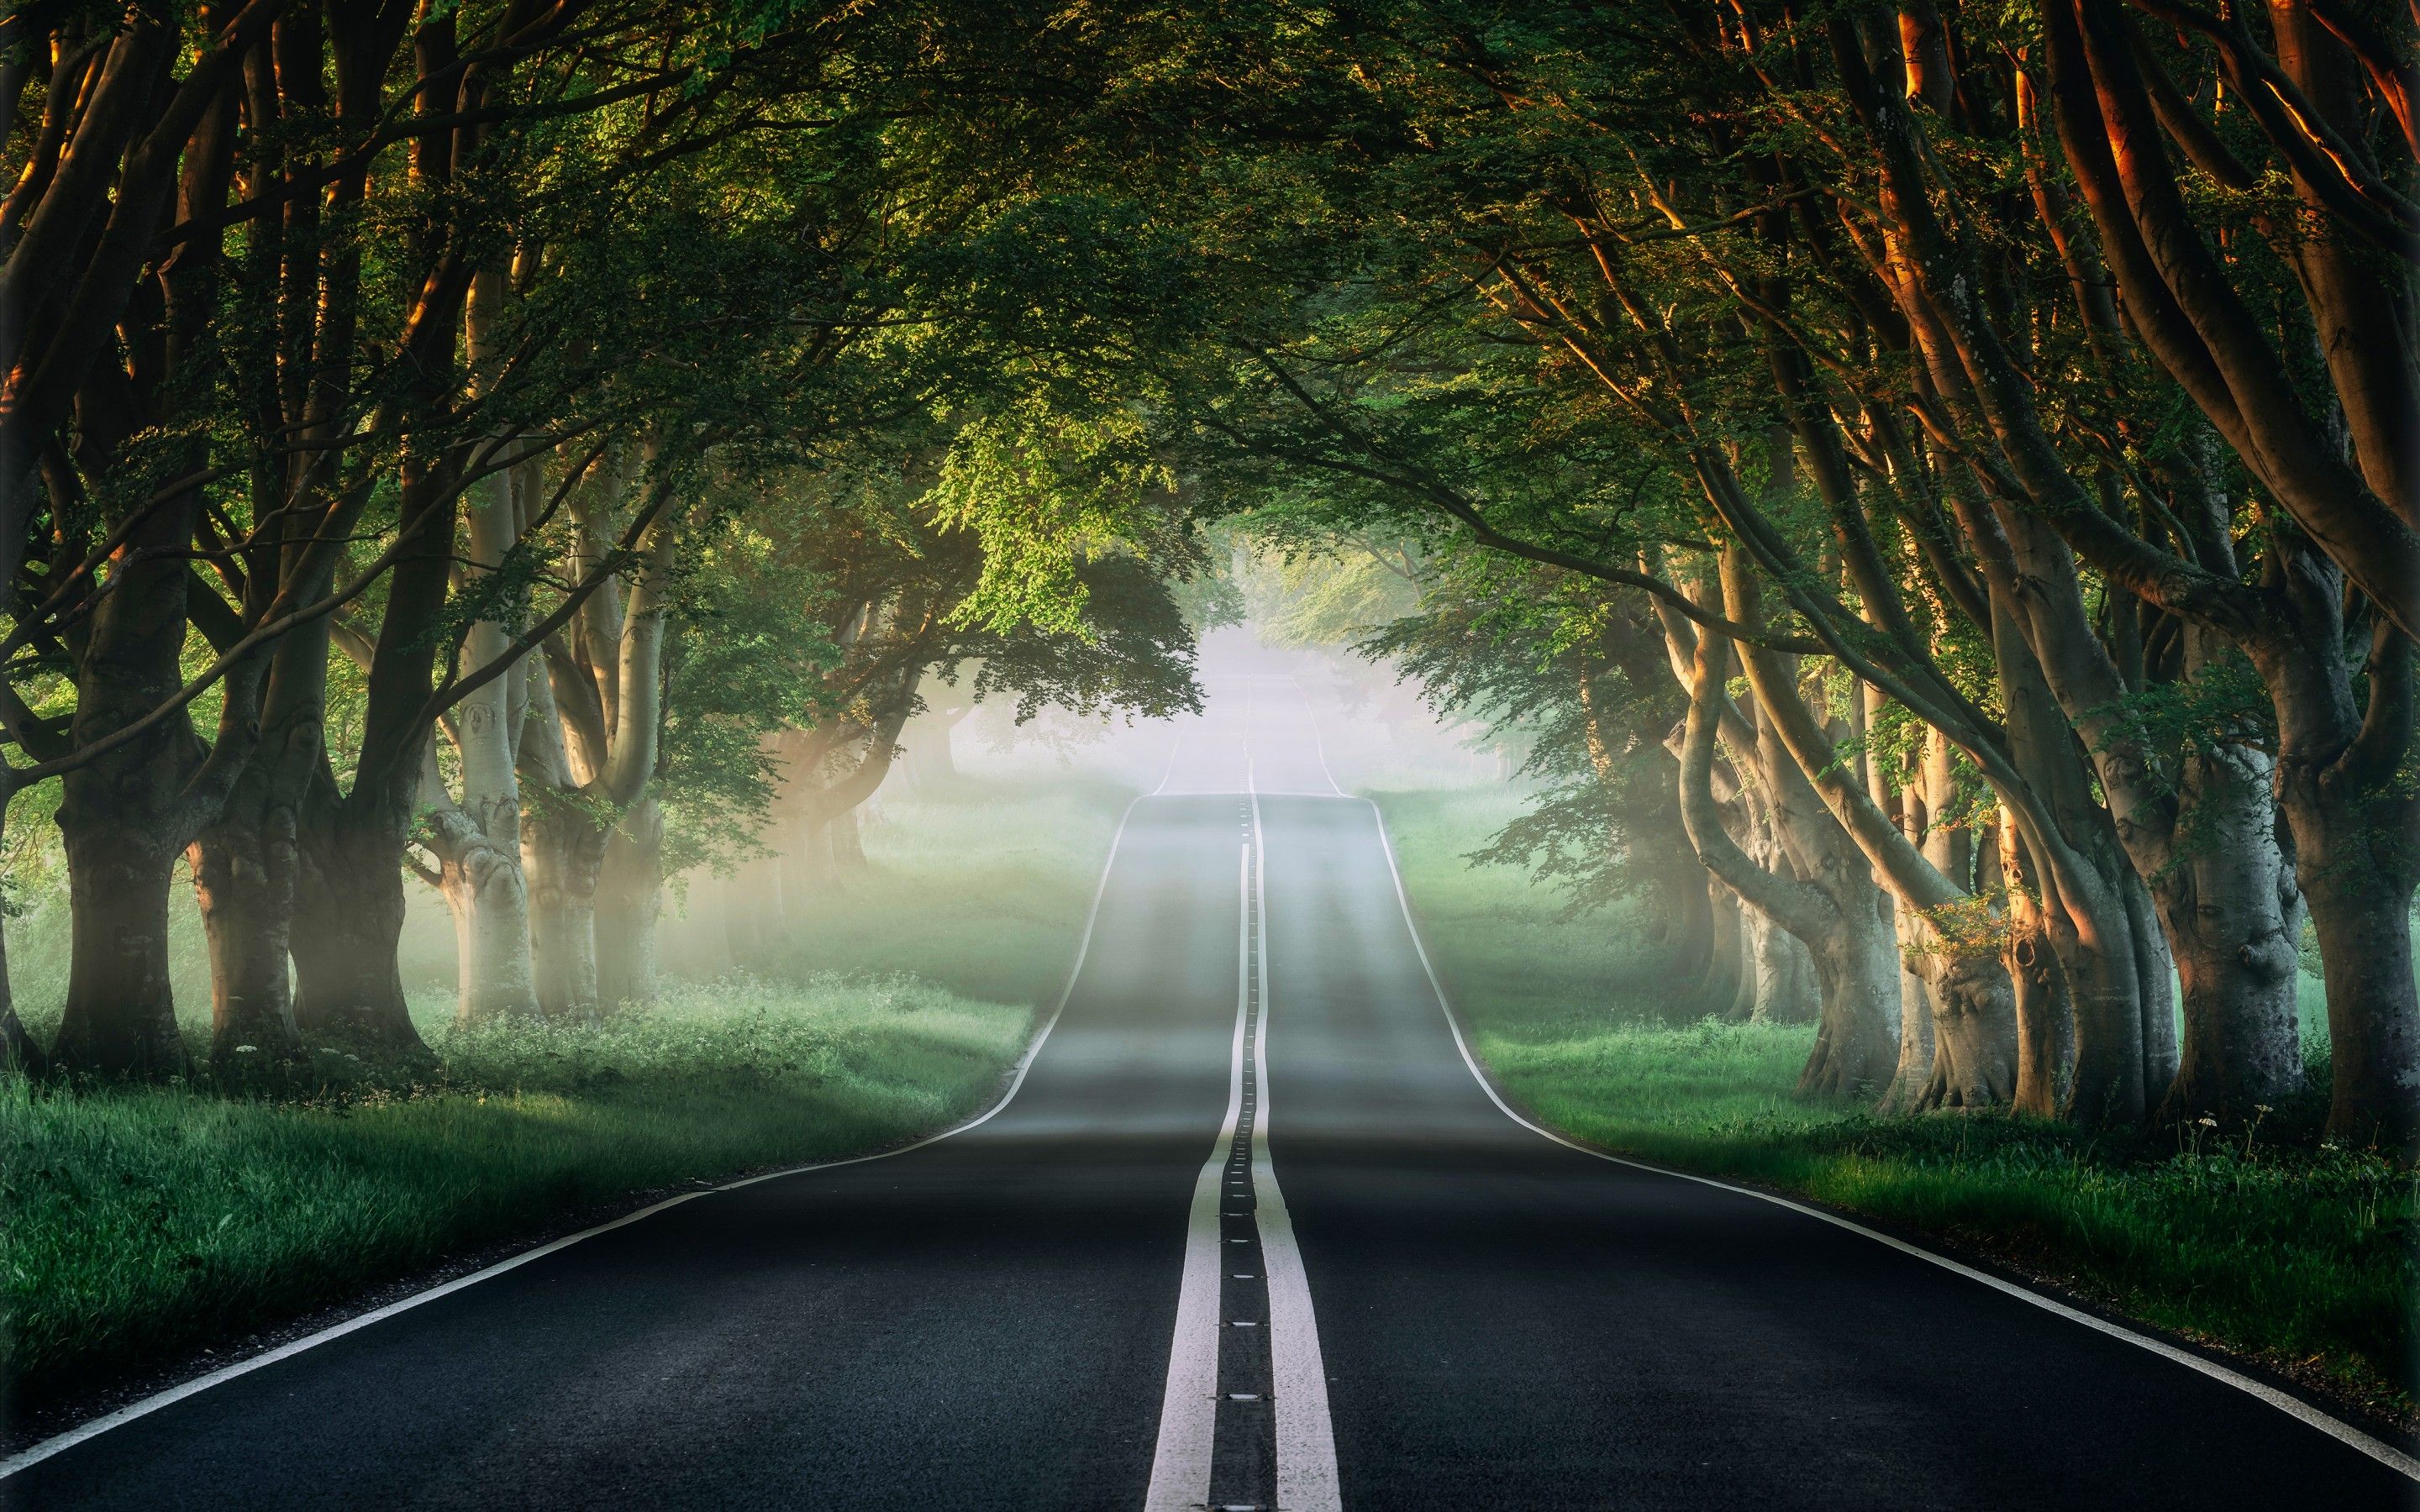 Forest 4K Wallpaper, Road, Mist, Avenue Trees, Plants, Green, Spring, Foggy, Nature